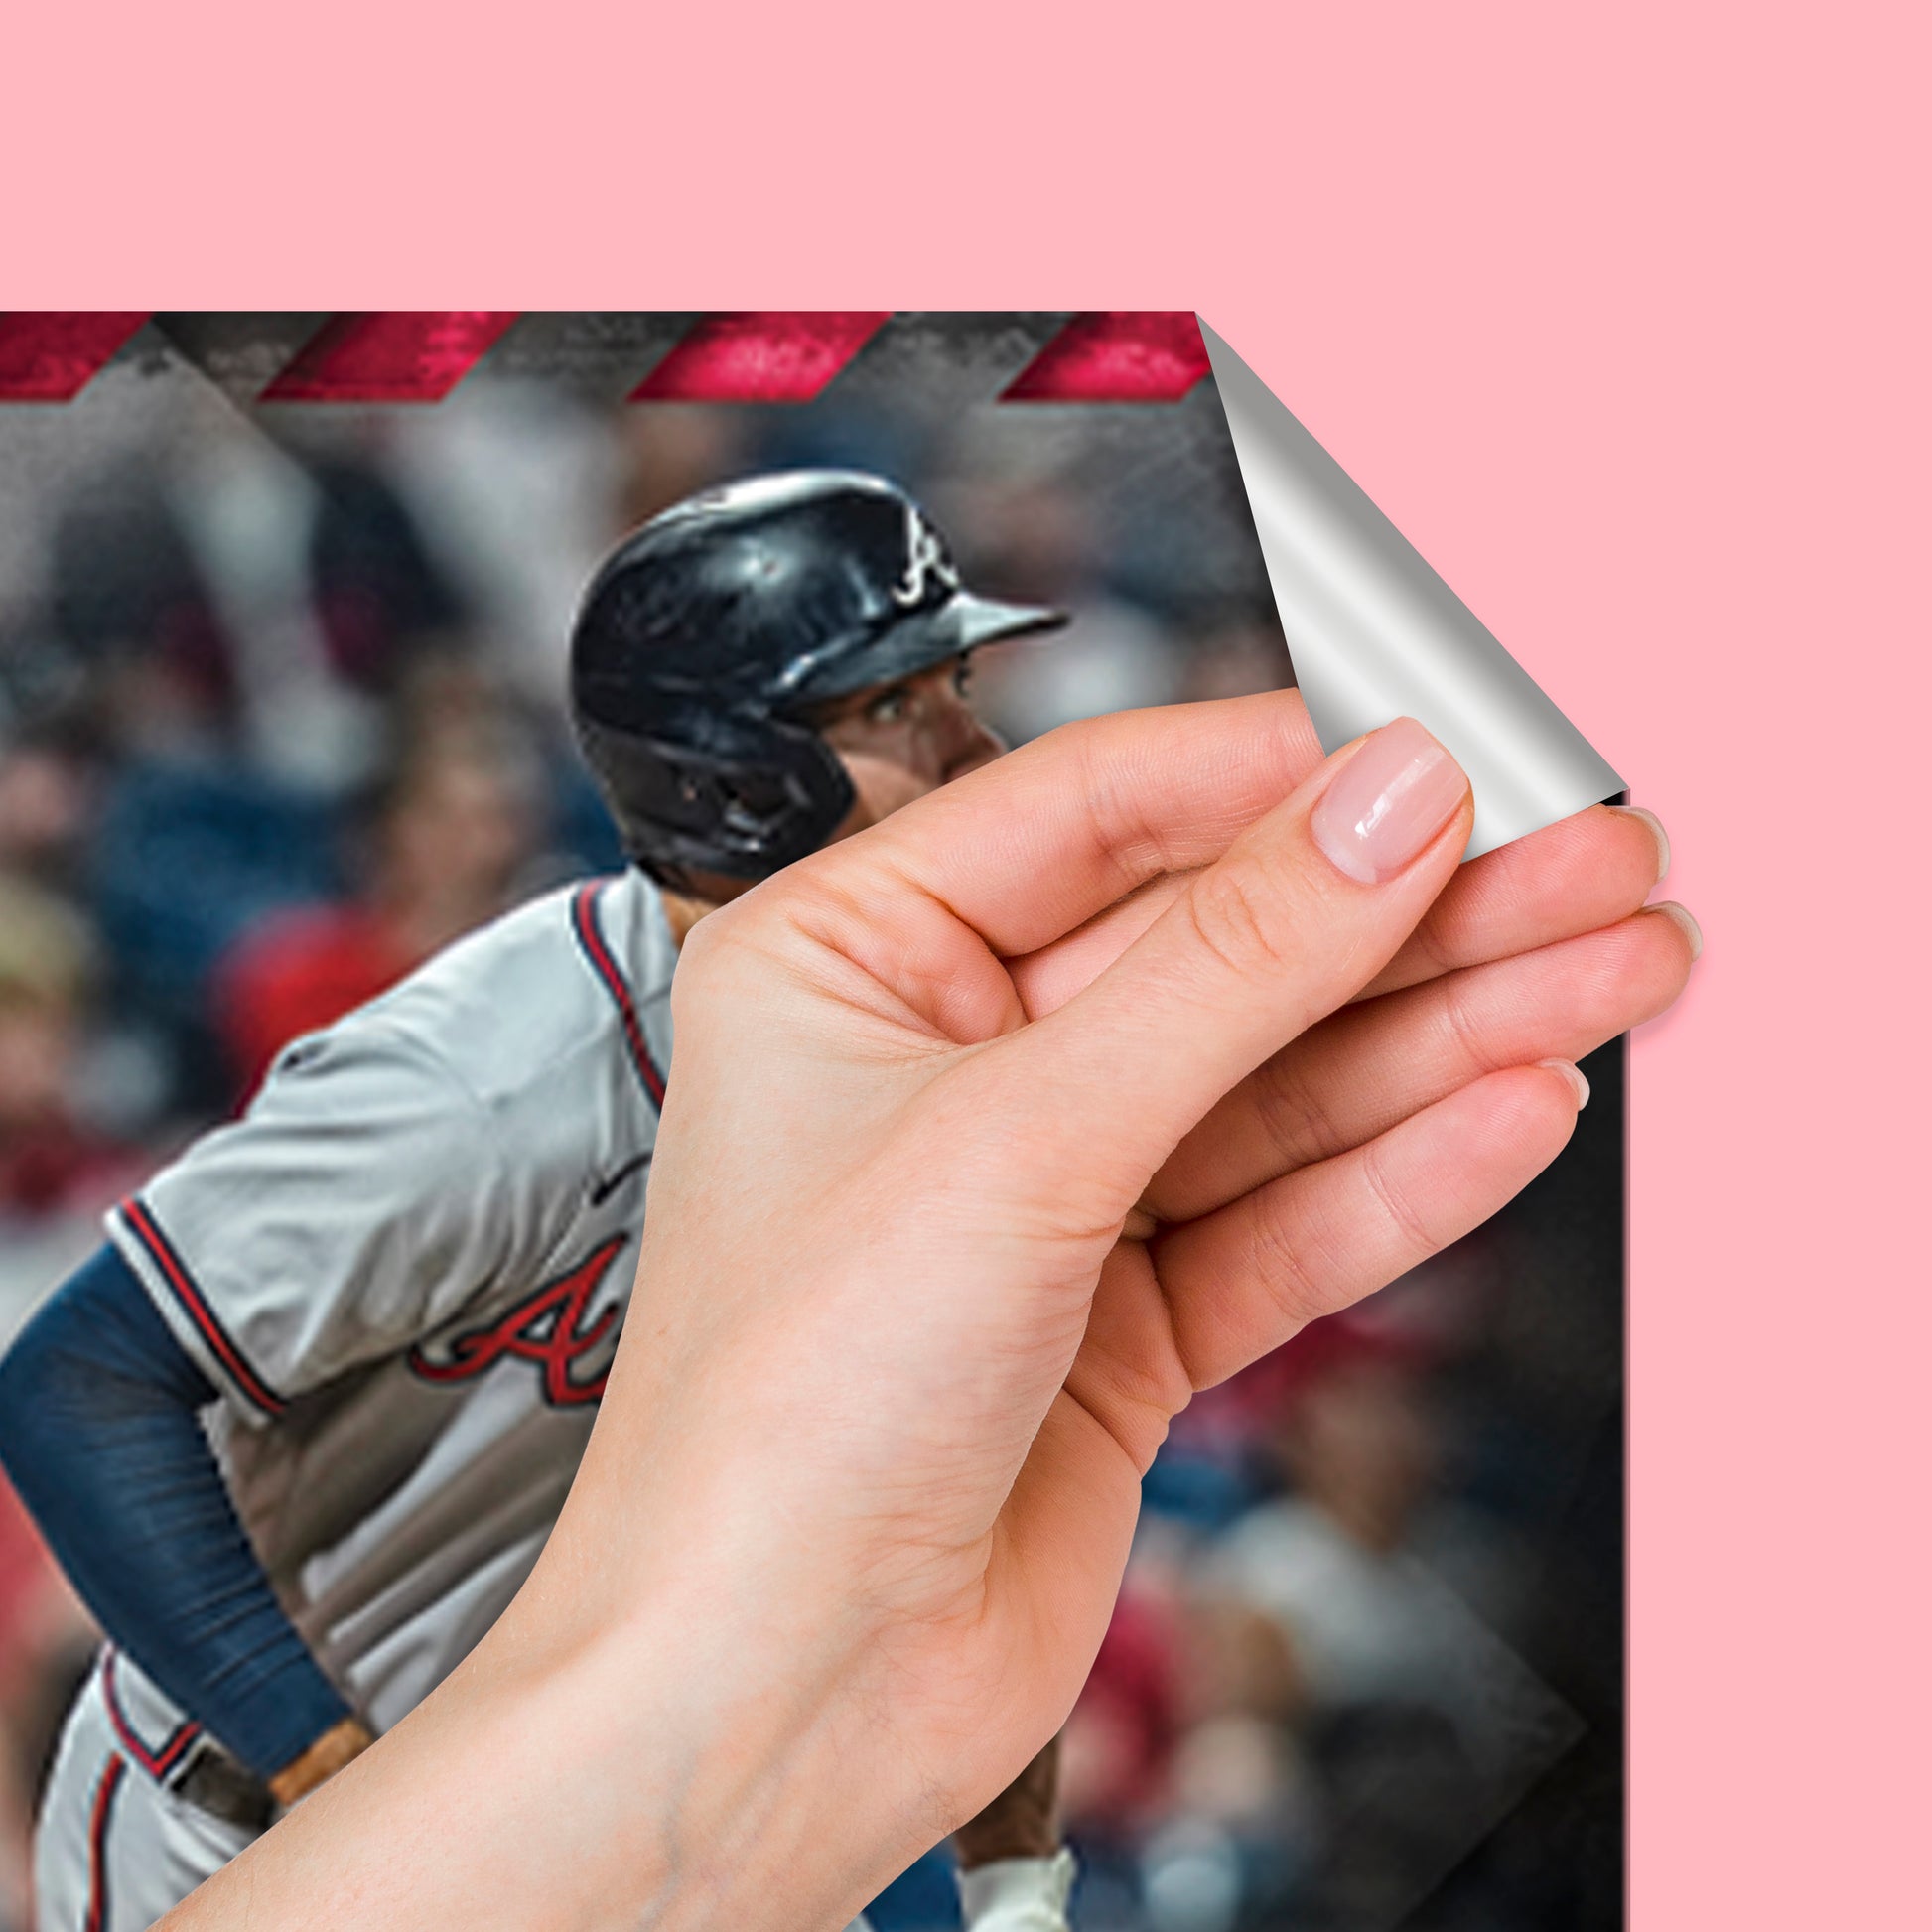 Atlanta Braves: Matt Olson 2023 City Connect - Officially Licensed MLB  Removable Adhesive Decal